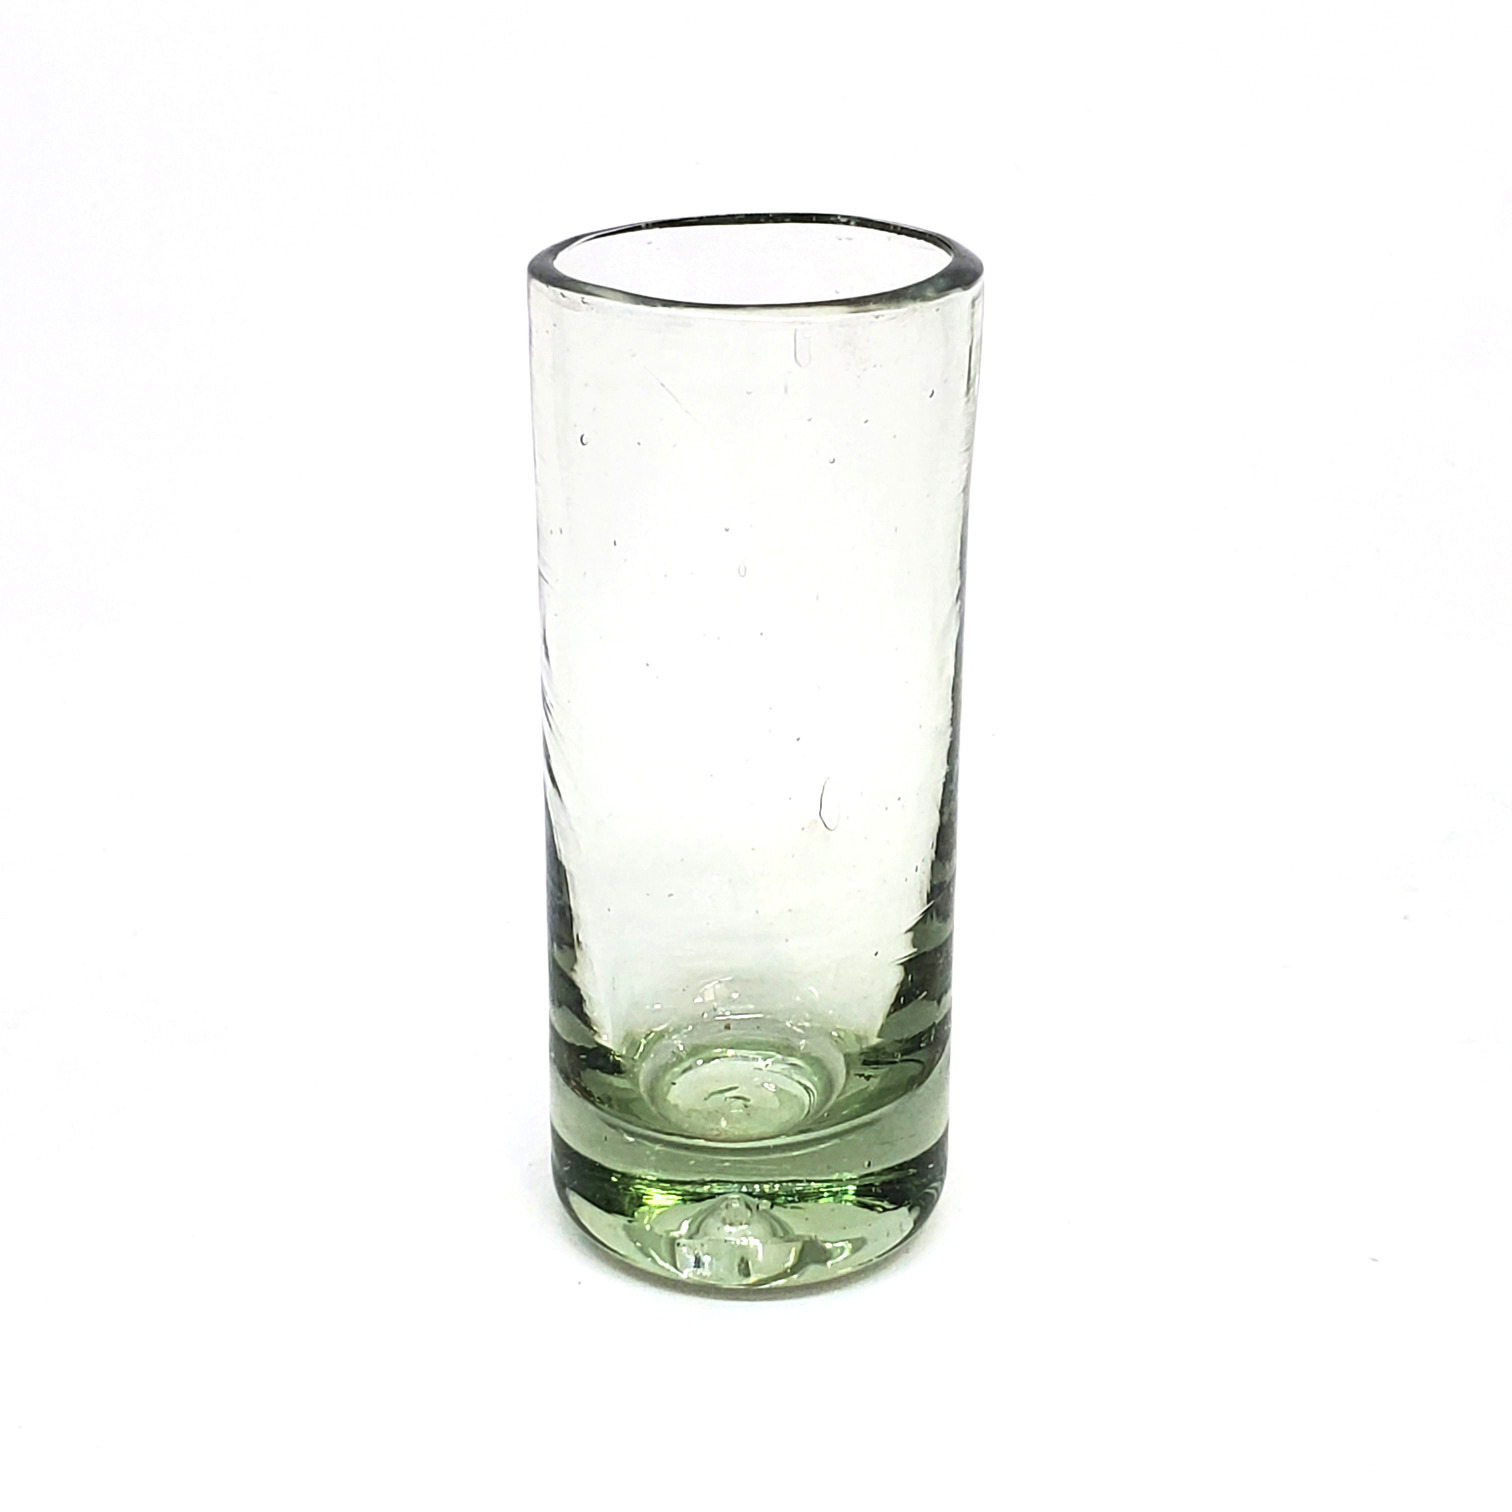 Tequila Shot Glasses / Clear 2 oz Tequila Shot Glasses (set of 6) / Sip your favourite tequila or mezcal with these iconic clear handcrafted shot glasses.